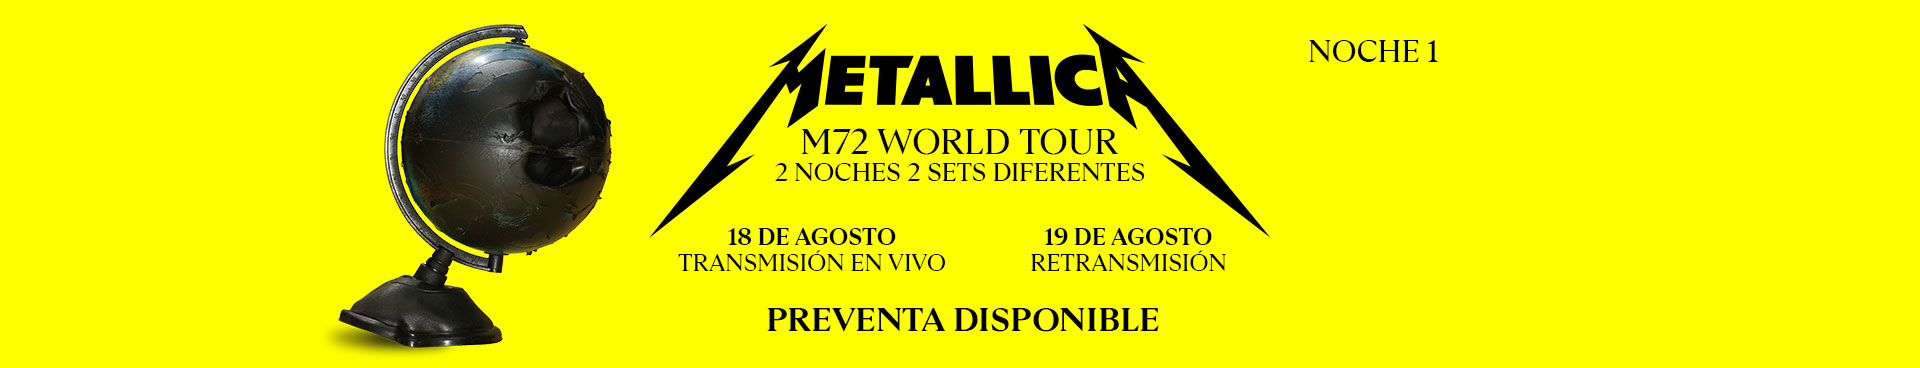 METALLICA: M72 WORLD TOUR LIVE FROM TX UNO